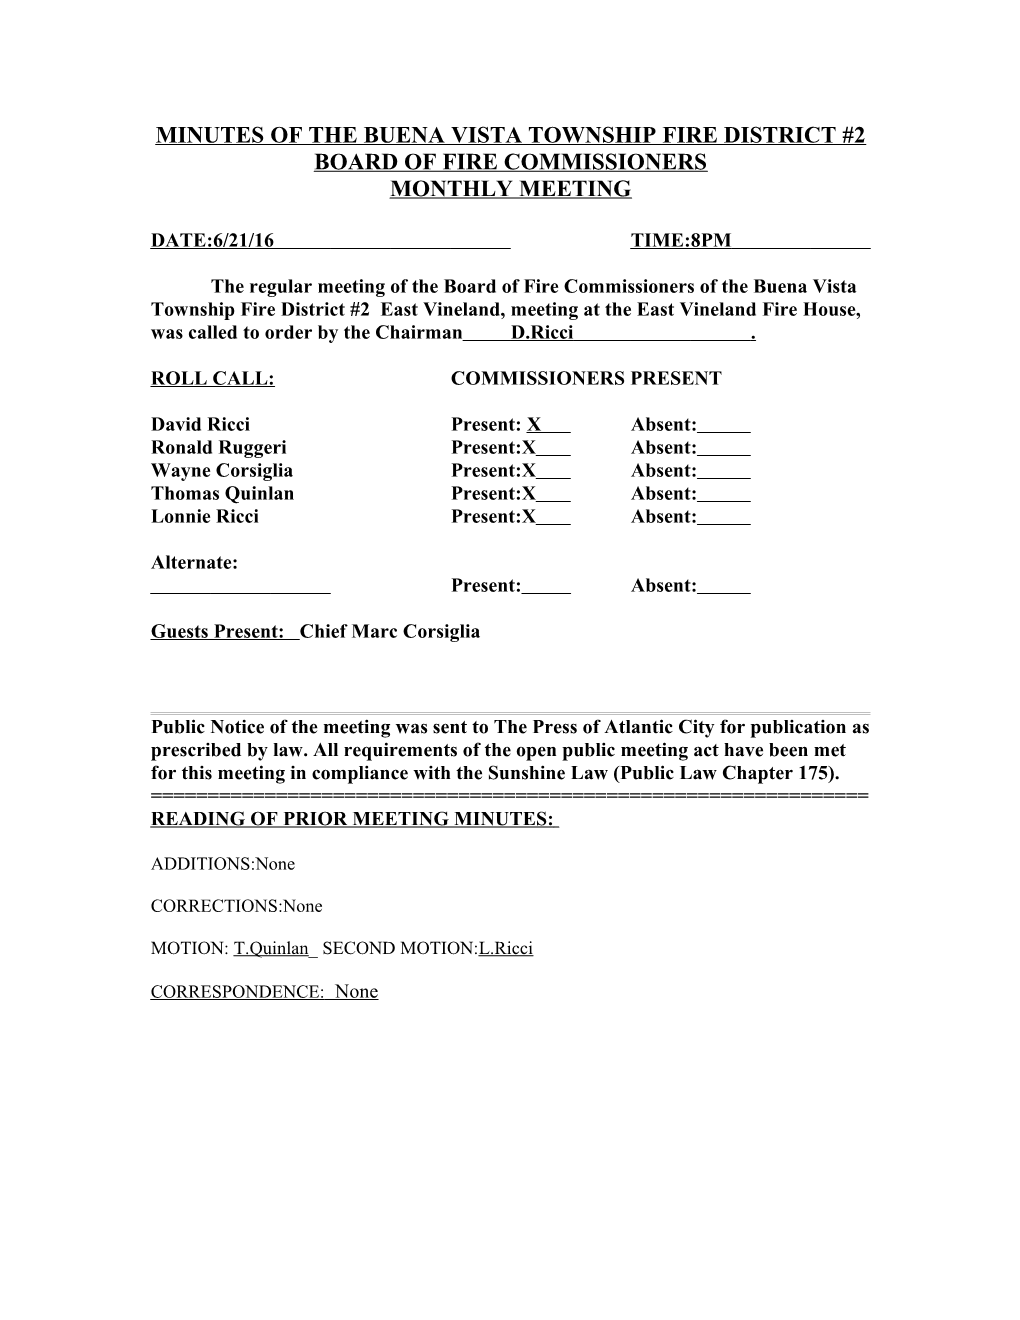 Minutes of the Buena Vista Township Fire District #2